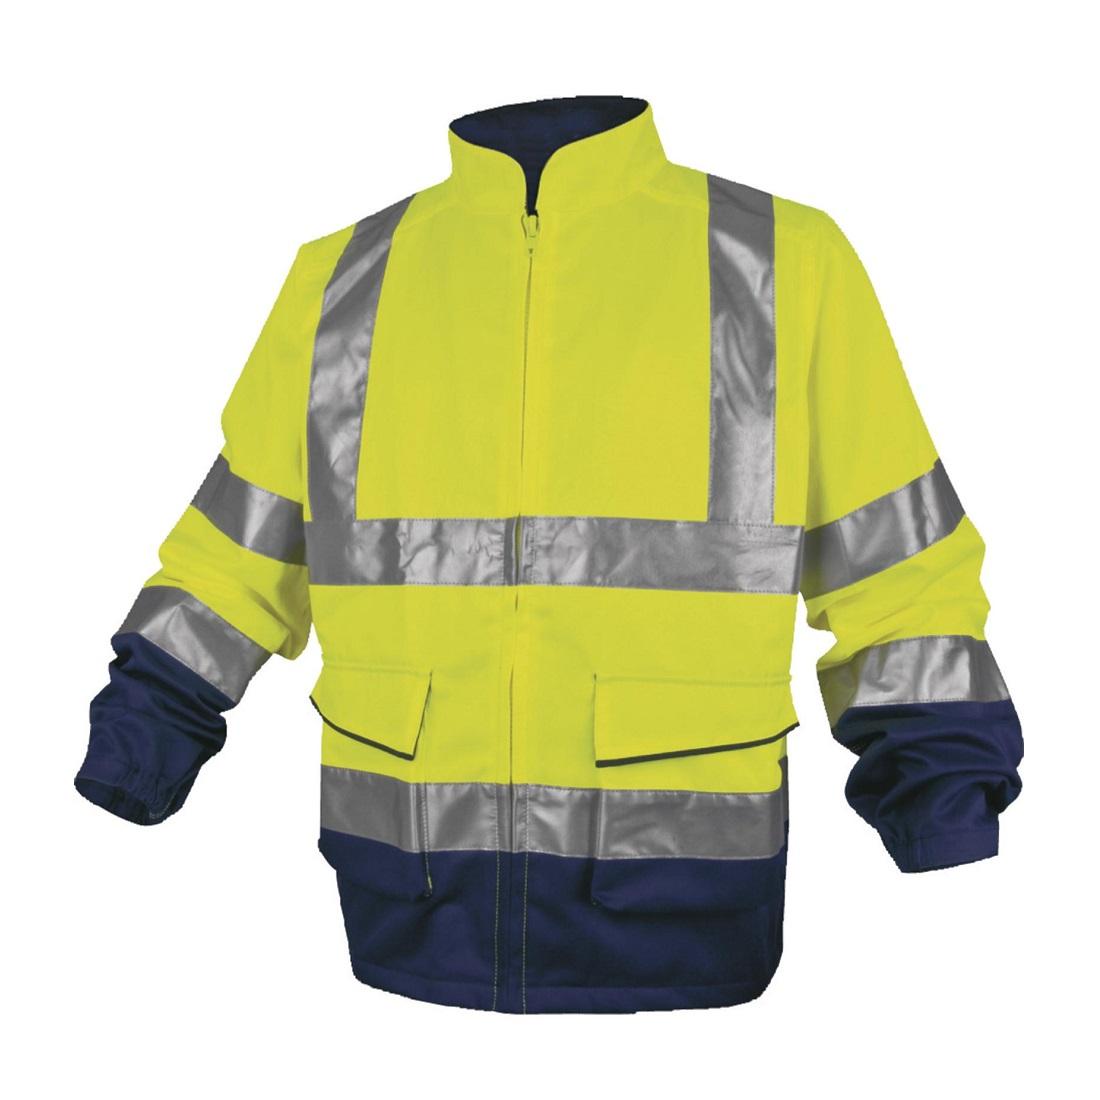 Safetyware - DELTA PLUS Panostyle High Visibility Working Jacket